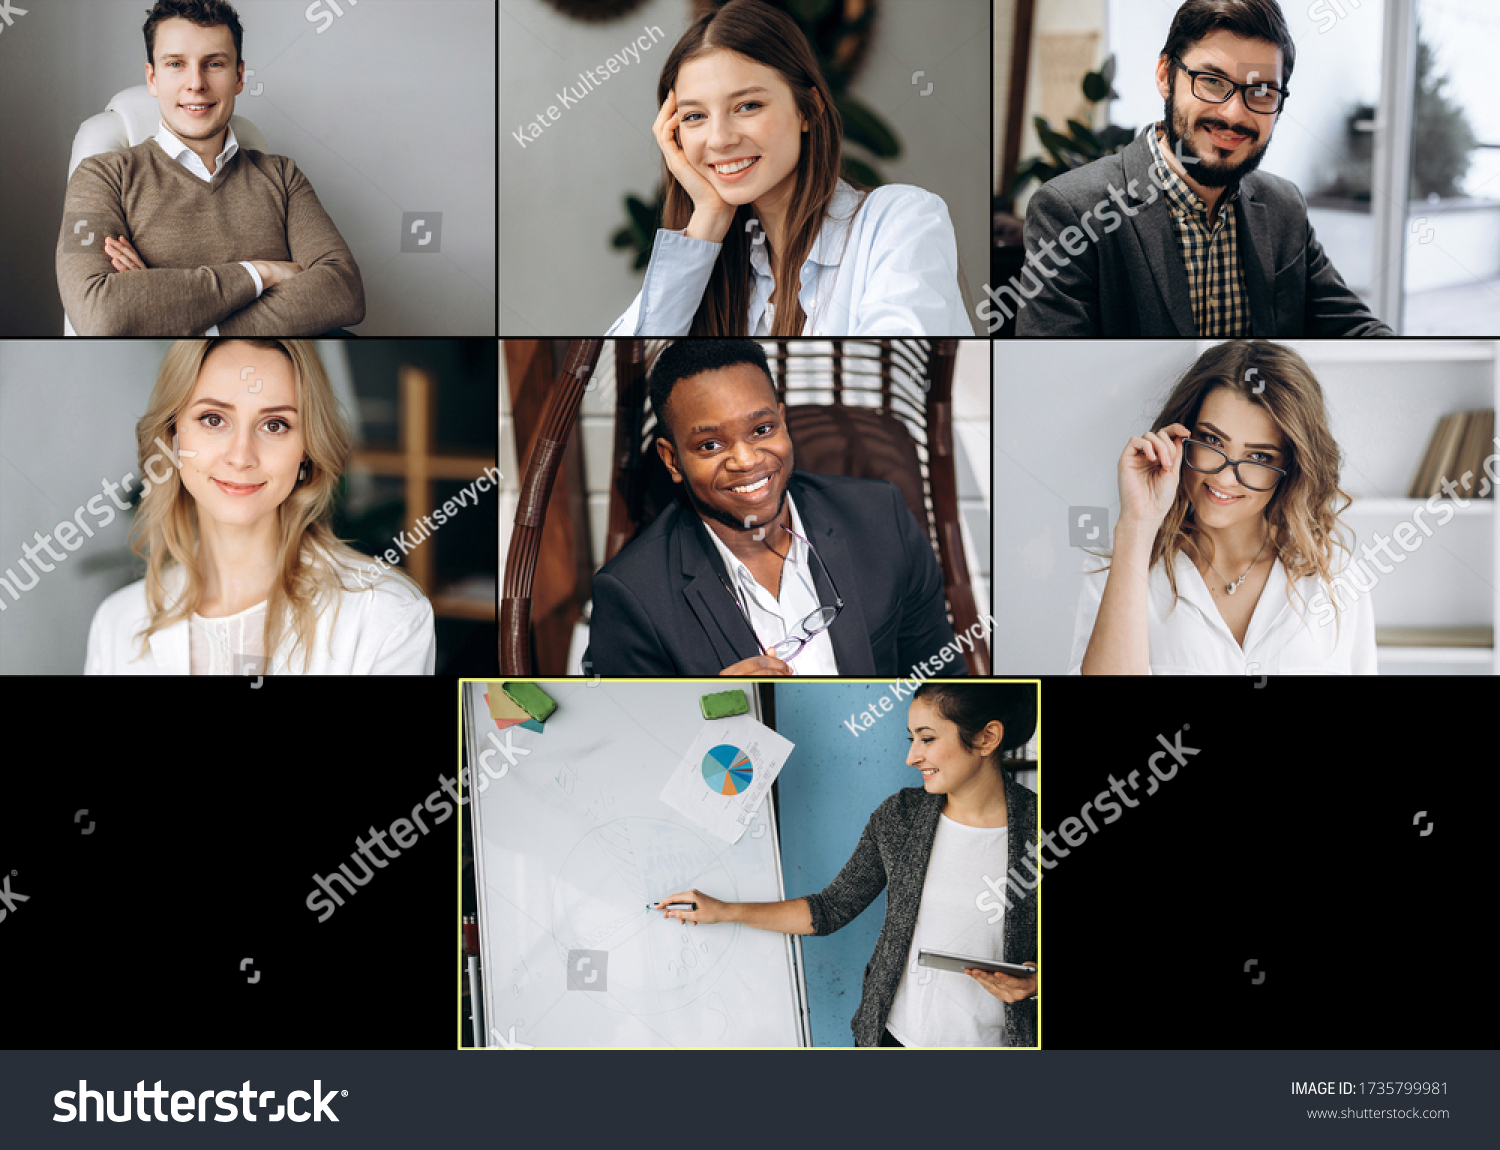 Online learning. Group online learning by video conference. The teacher teaches his students remotely. View of people on screen of a laptop #1735799981